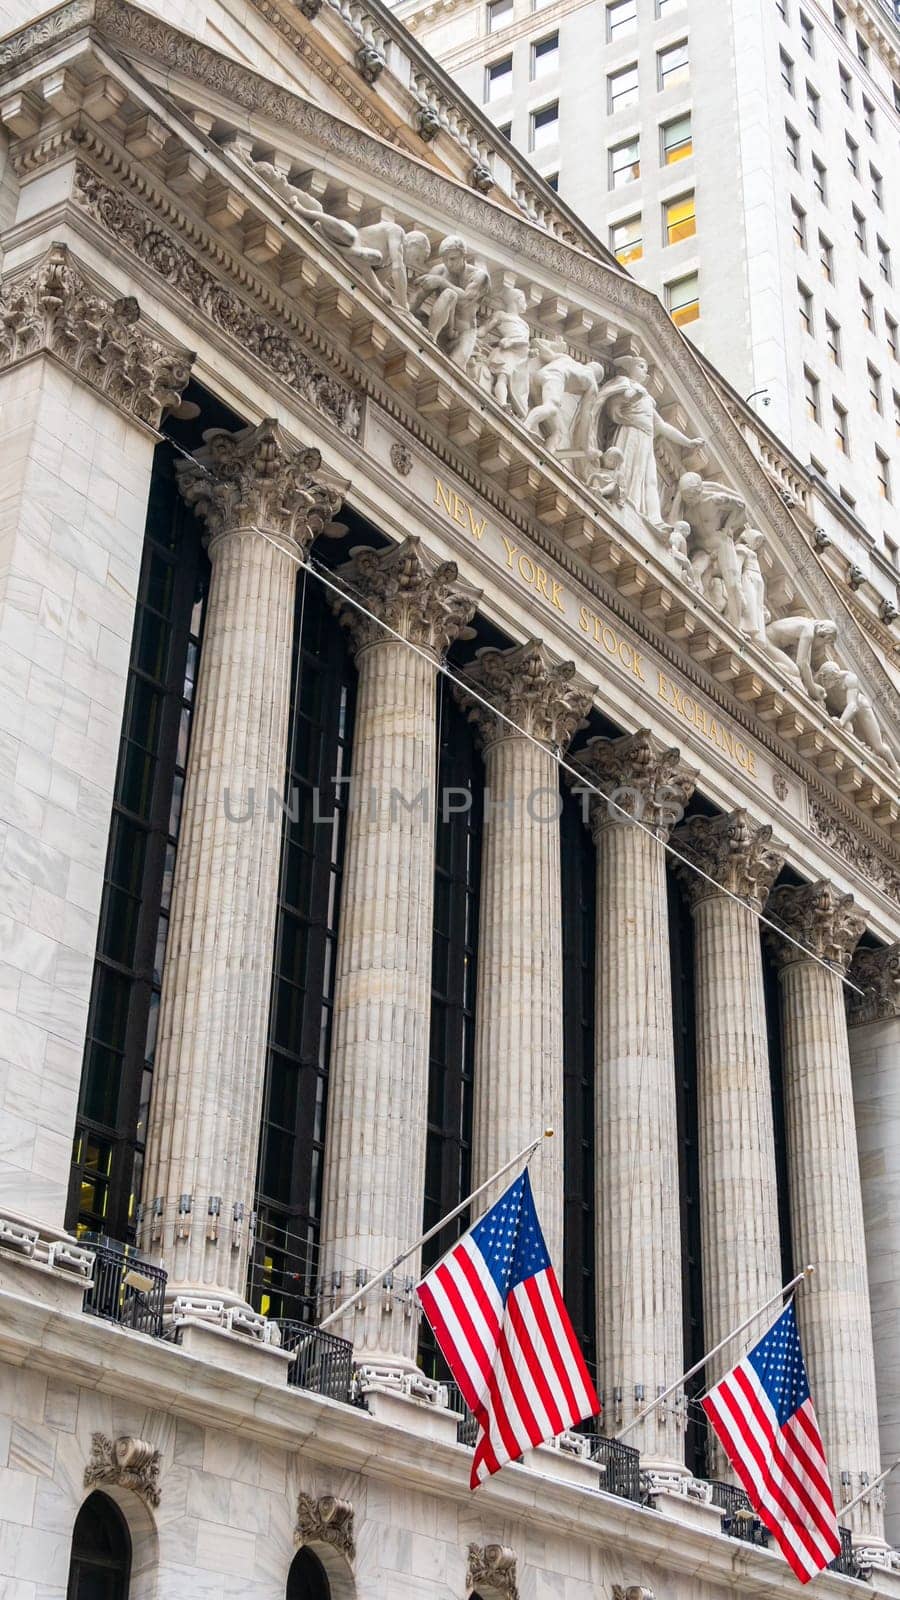 New York, USA - September 19, 2022: US national flags on the New York Stock Exchange building on